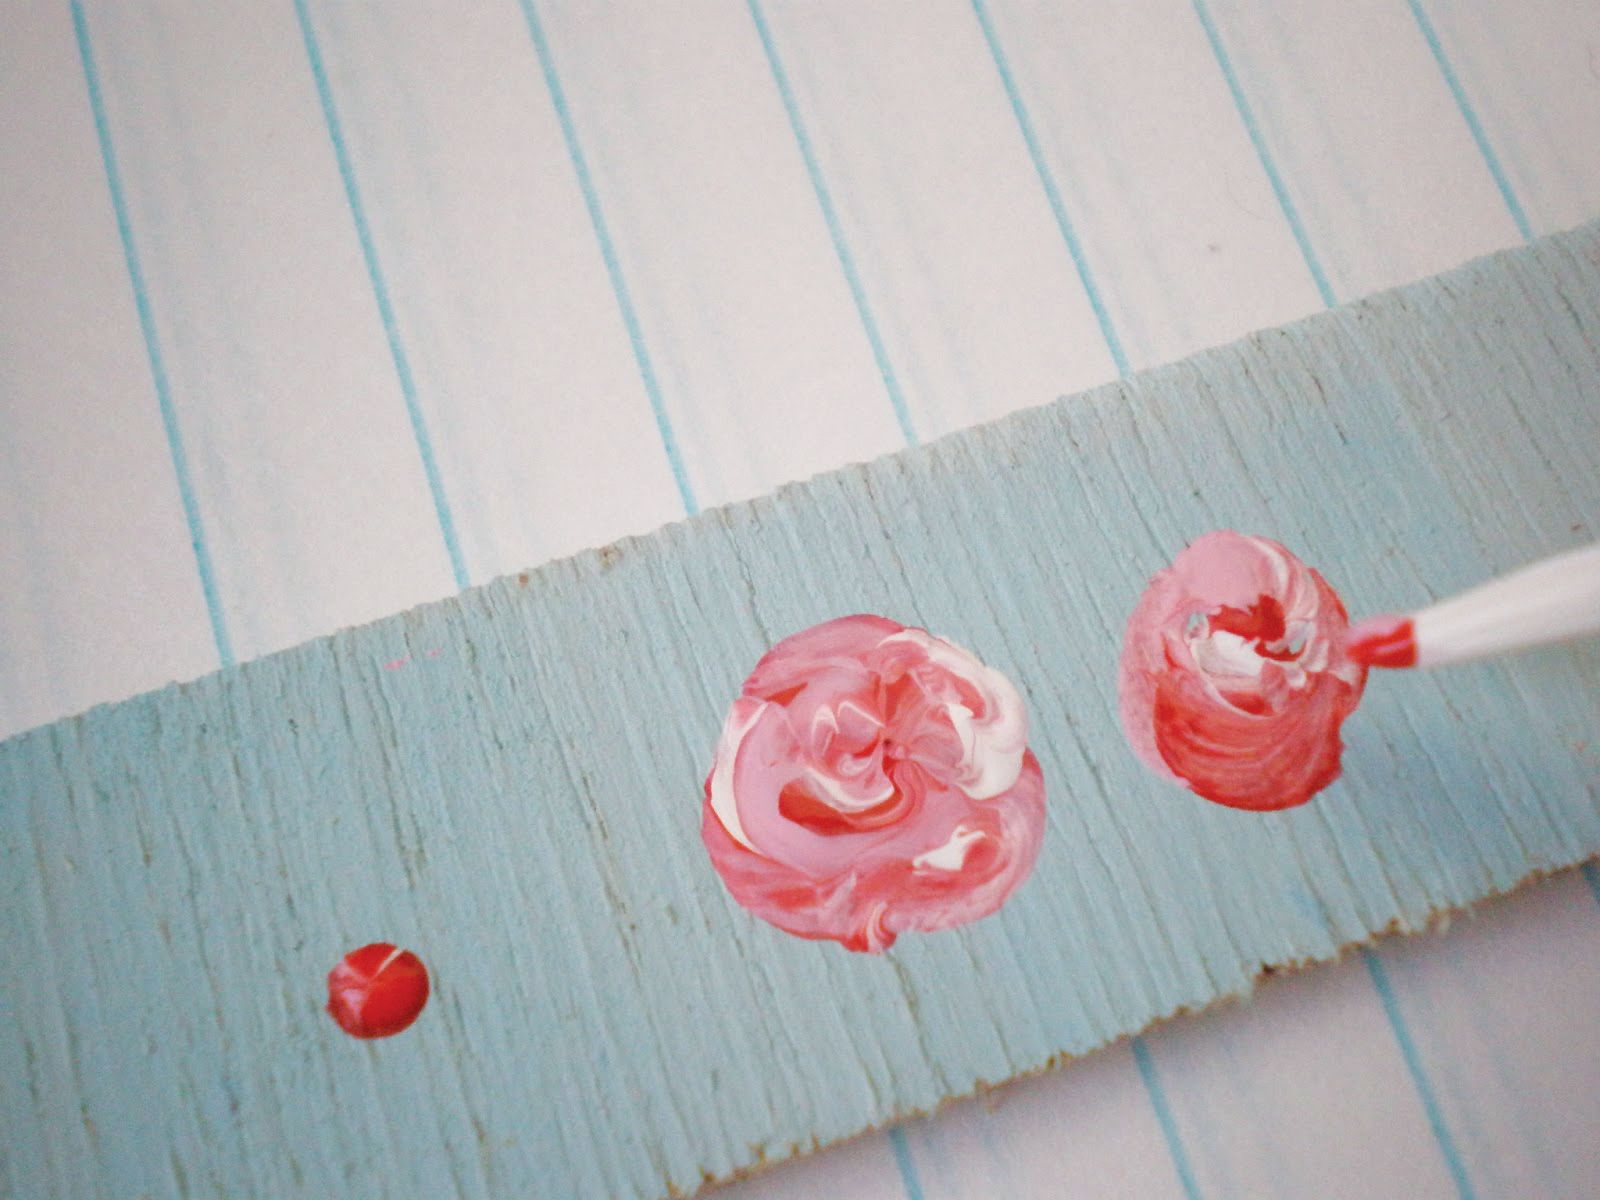 How to paint shabby chic roses